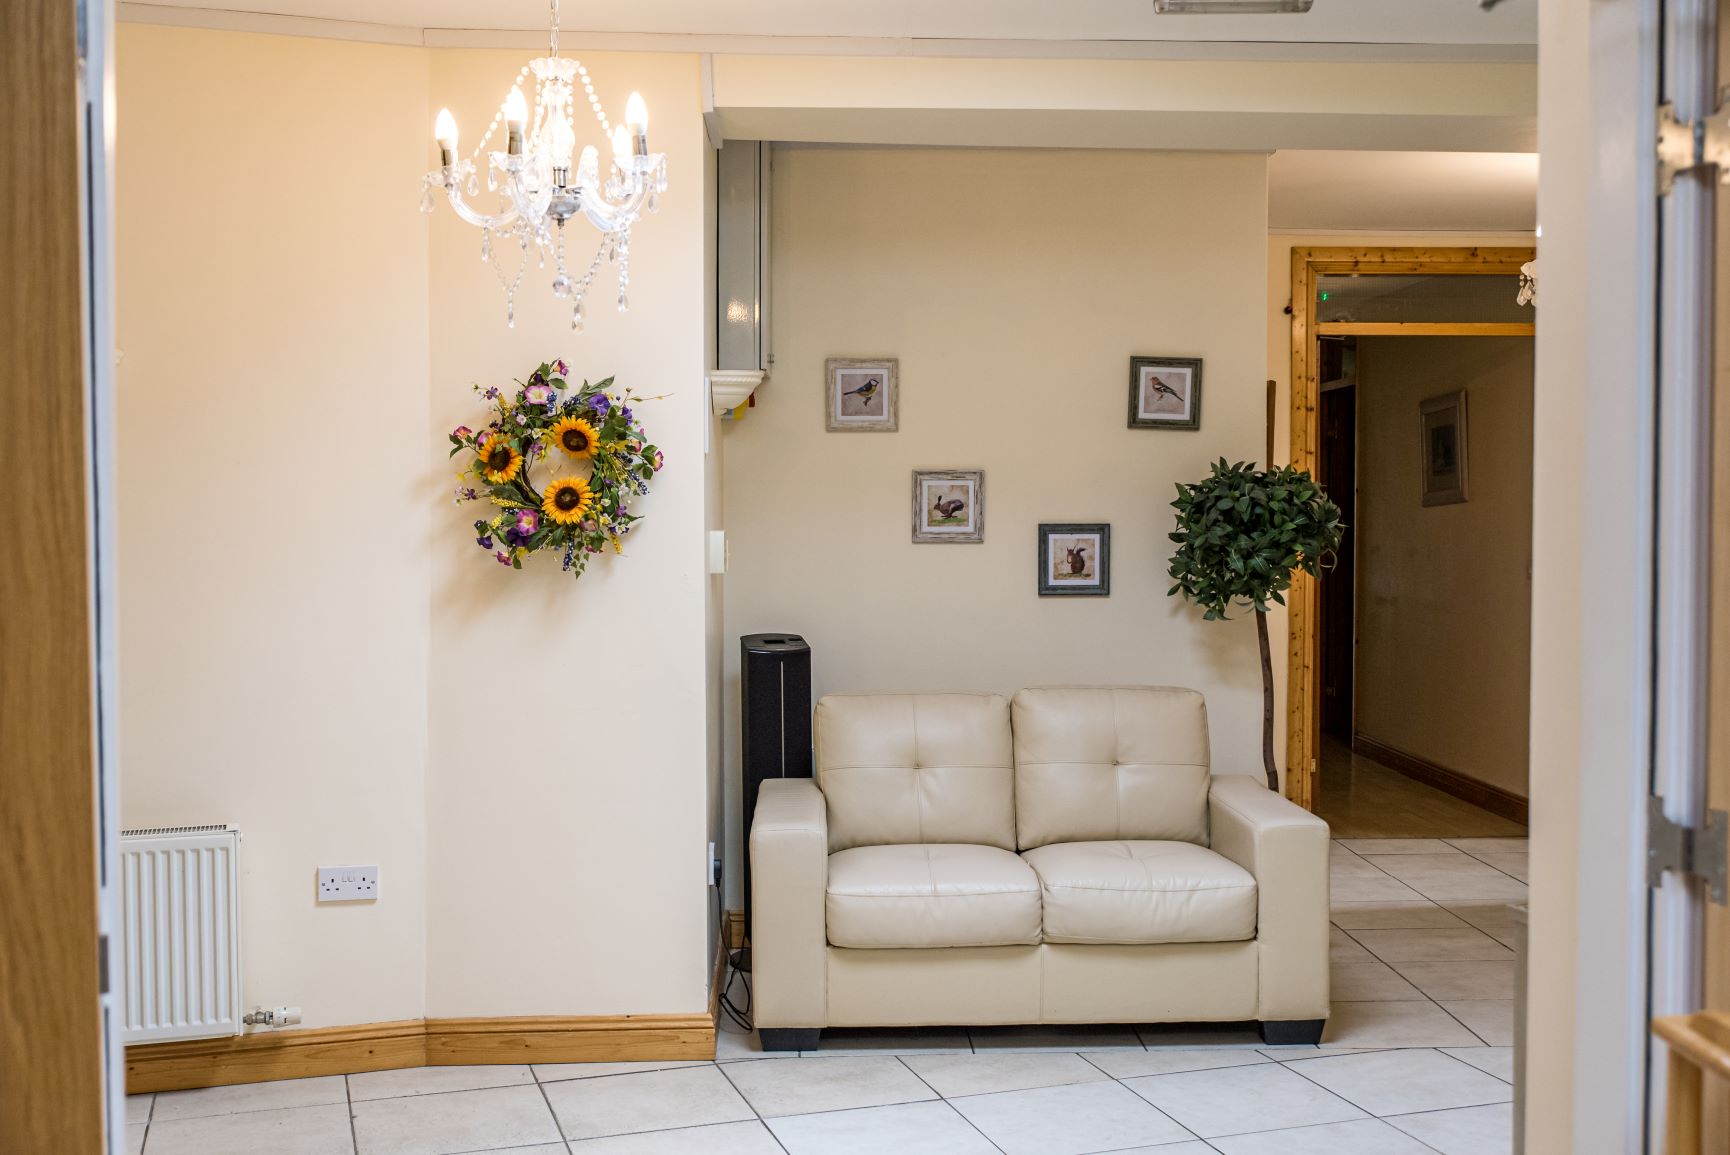 The main foyer at the entrance with cozy two-seater sofa and tasteful decor.